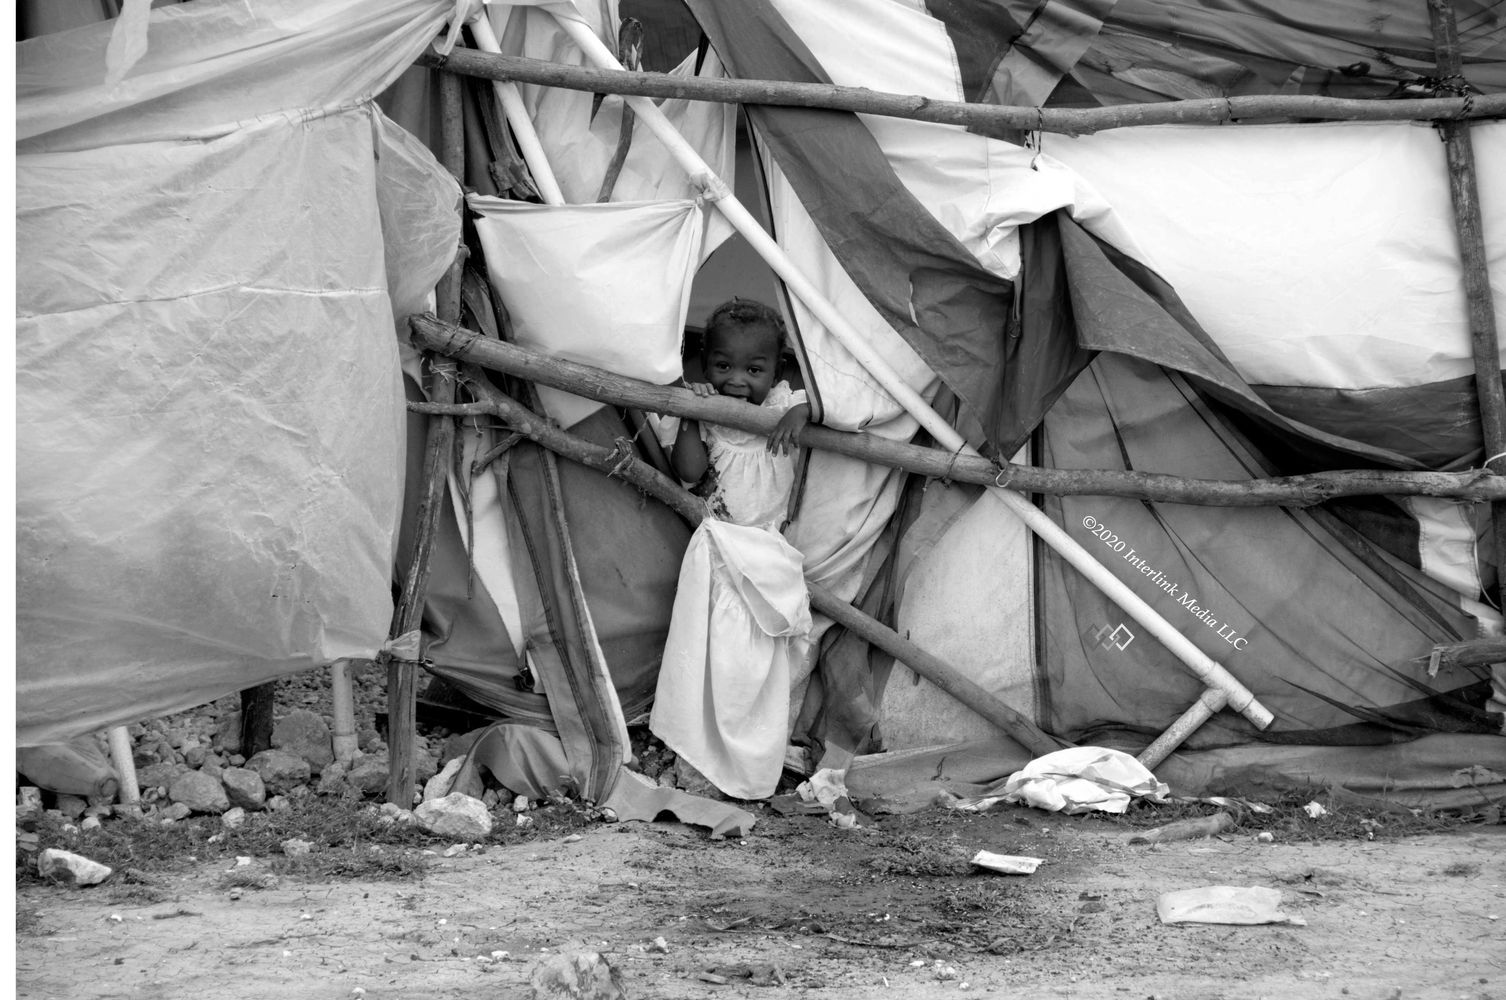 A small girl in a tent in Haiti immediately after the massive earthquake in 2010.